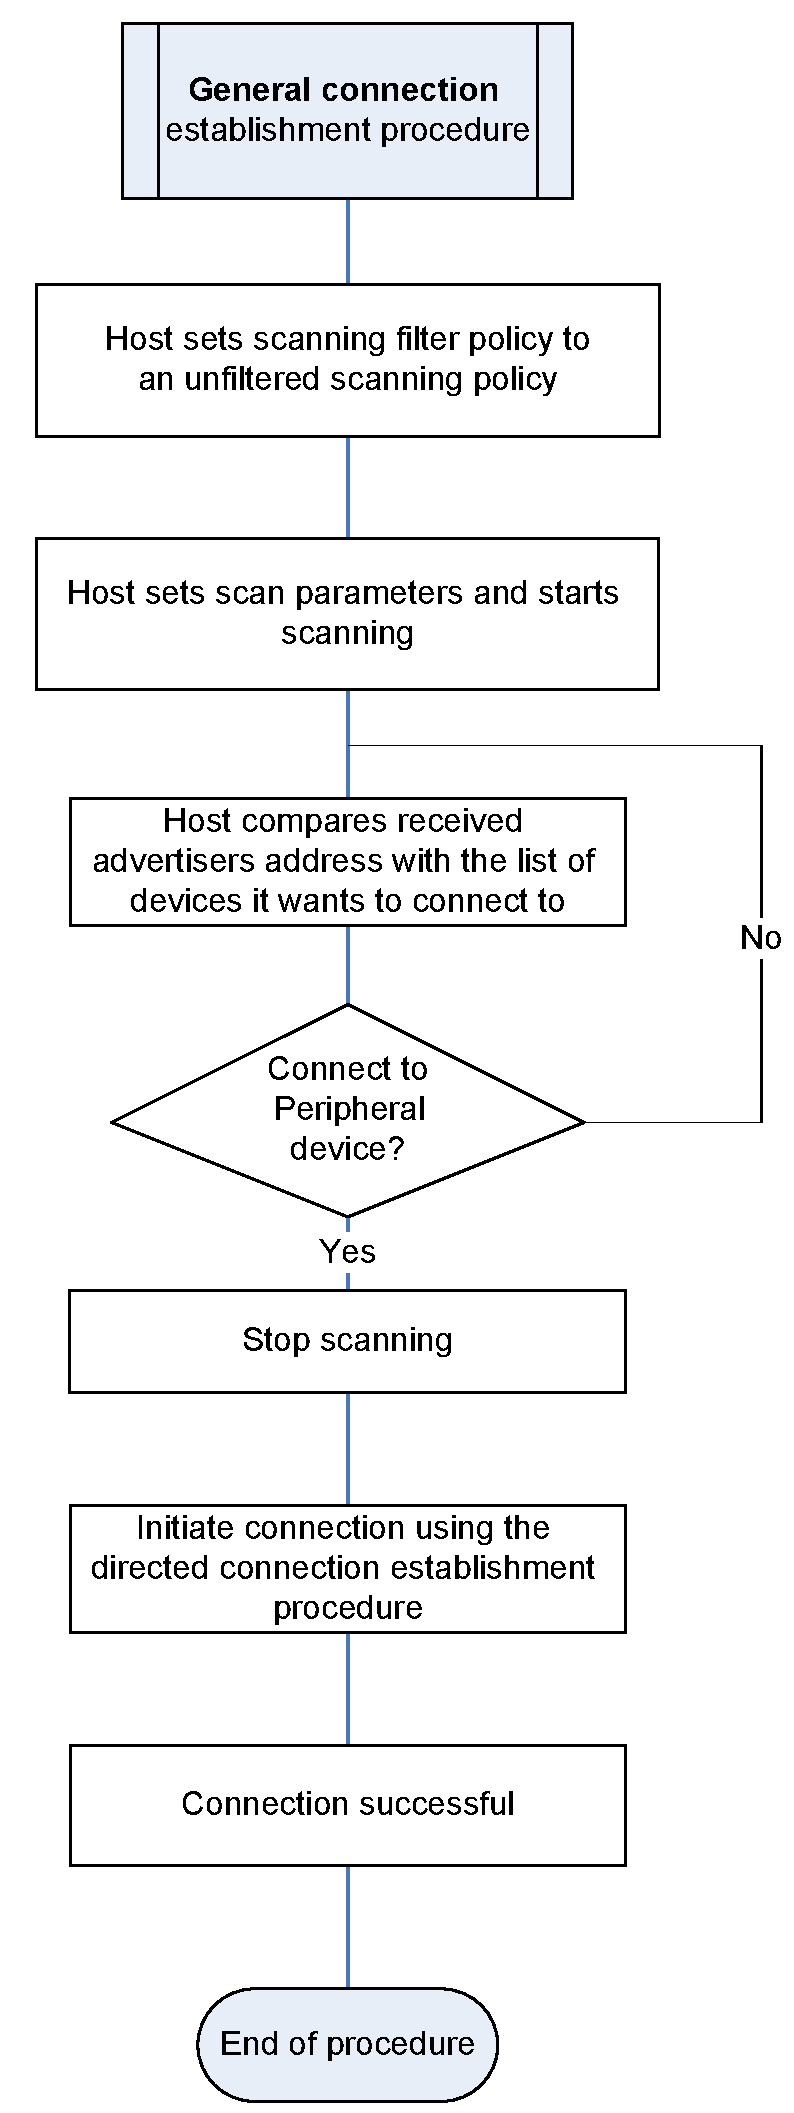 Flow chart for a device performing the General Connection Establishment procedure